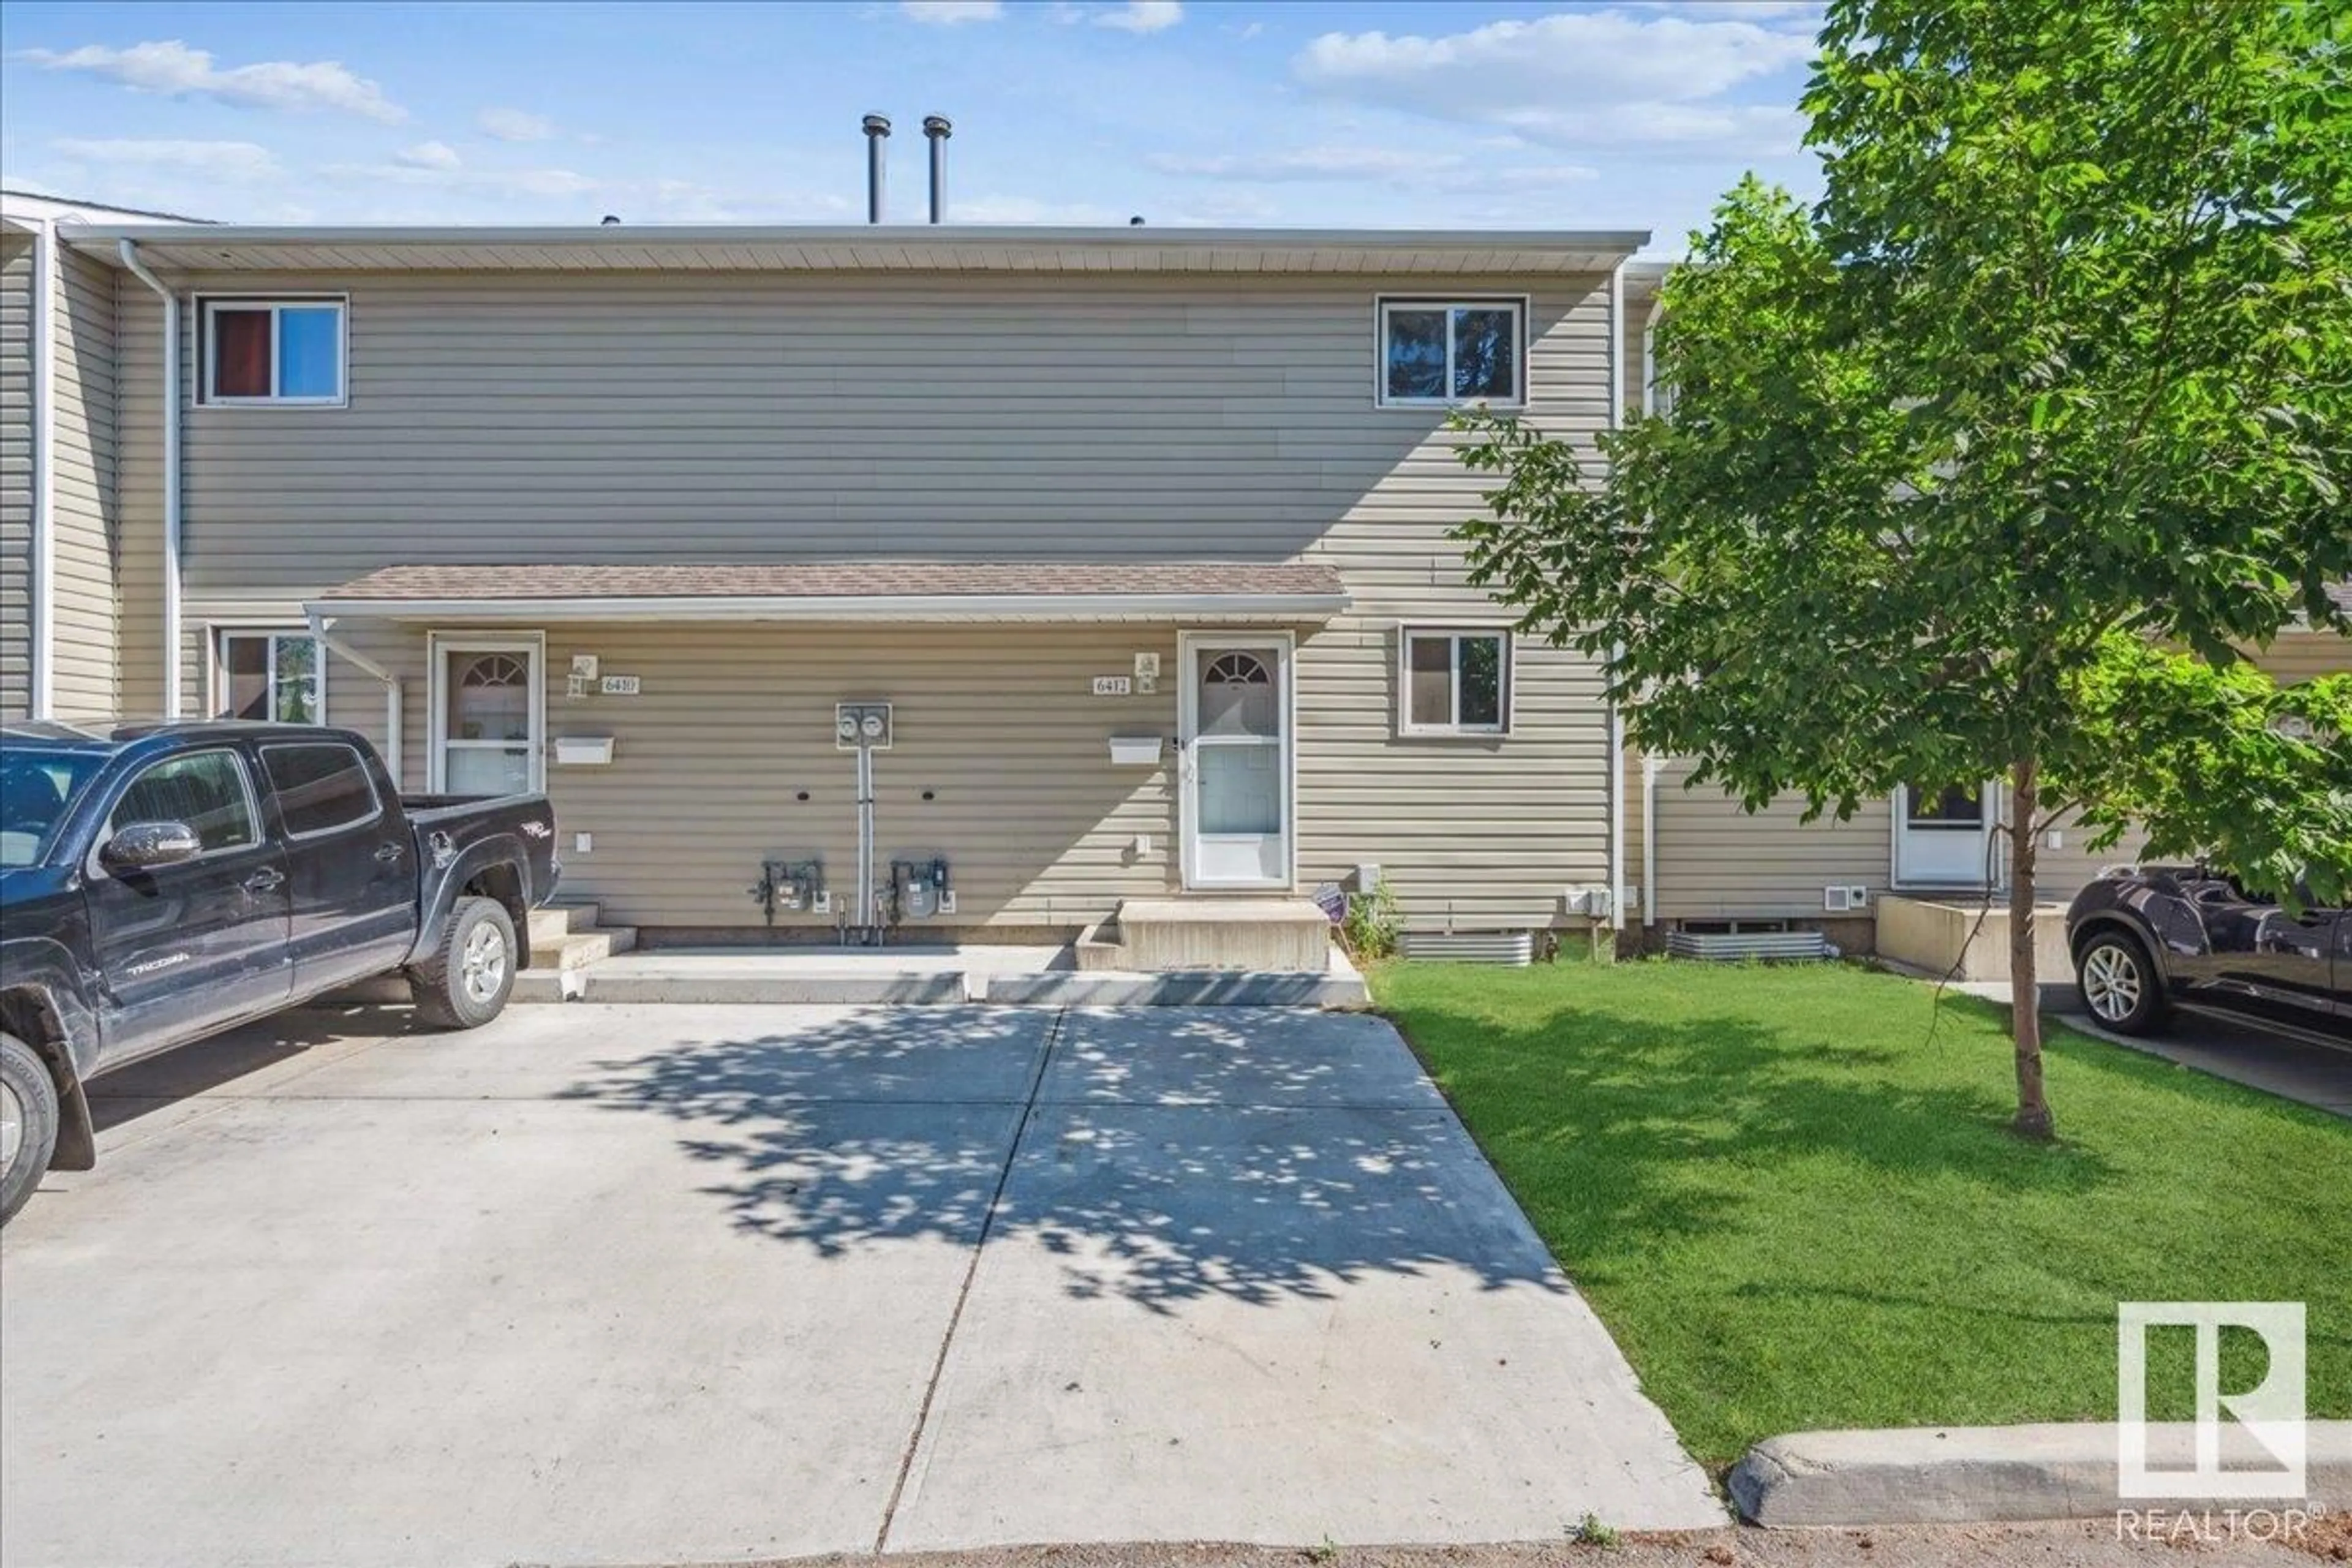 A pic from exterior of the house or condo for 6412 180 ST NW, Edmonton Alberta T5T2J6